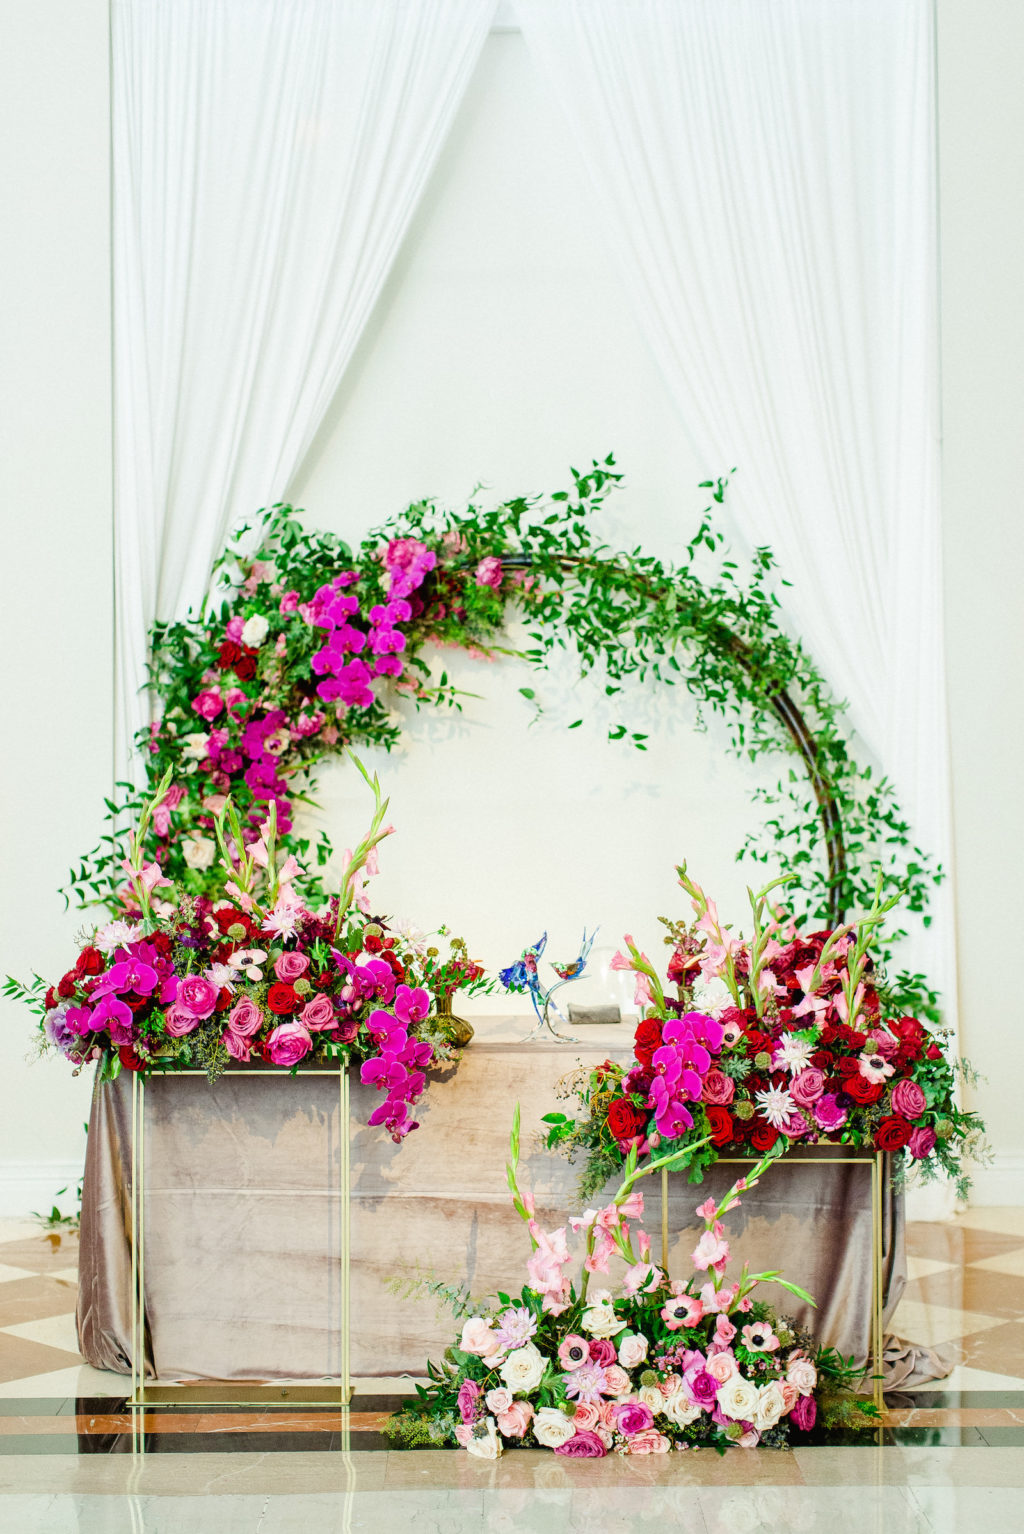 Downtown Tampa Colorful Luxury Wedding Sweetheart Table with Repurposed Aisle Flowers | Bright Colorful Floral Circle Moon Round Arch Backdrop with Pink Roses and Purple Orchids and Greenery